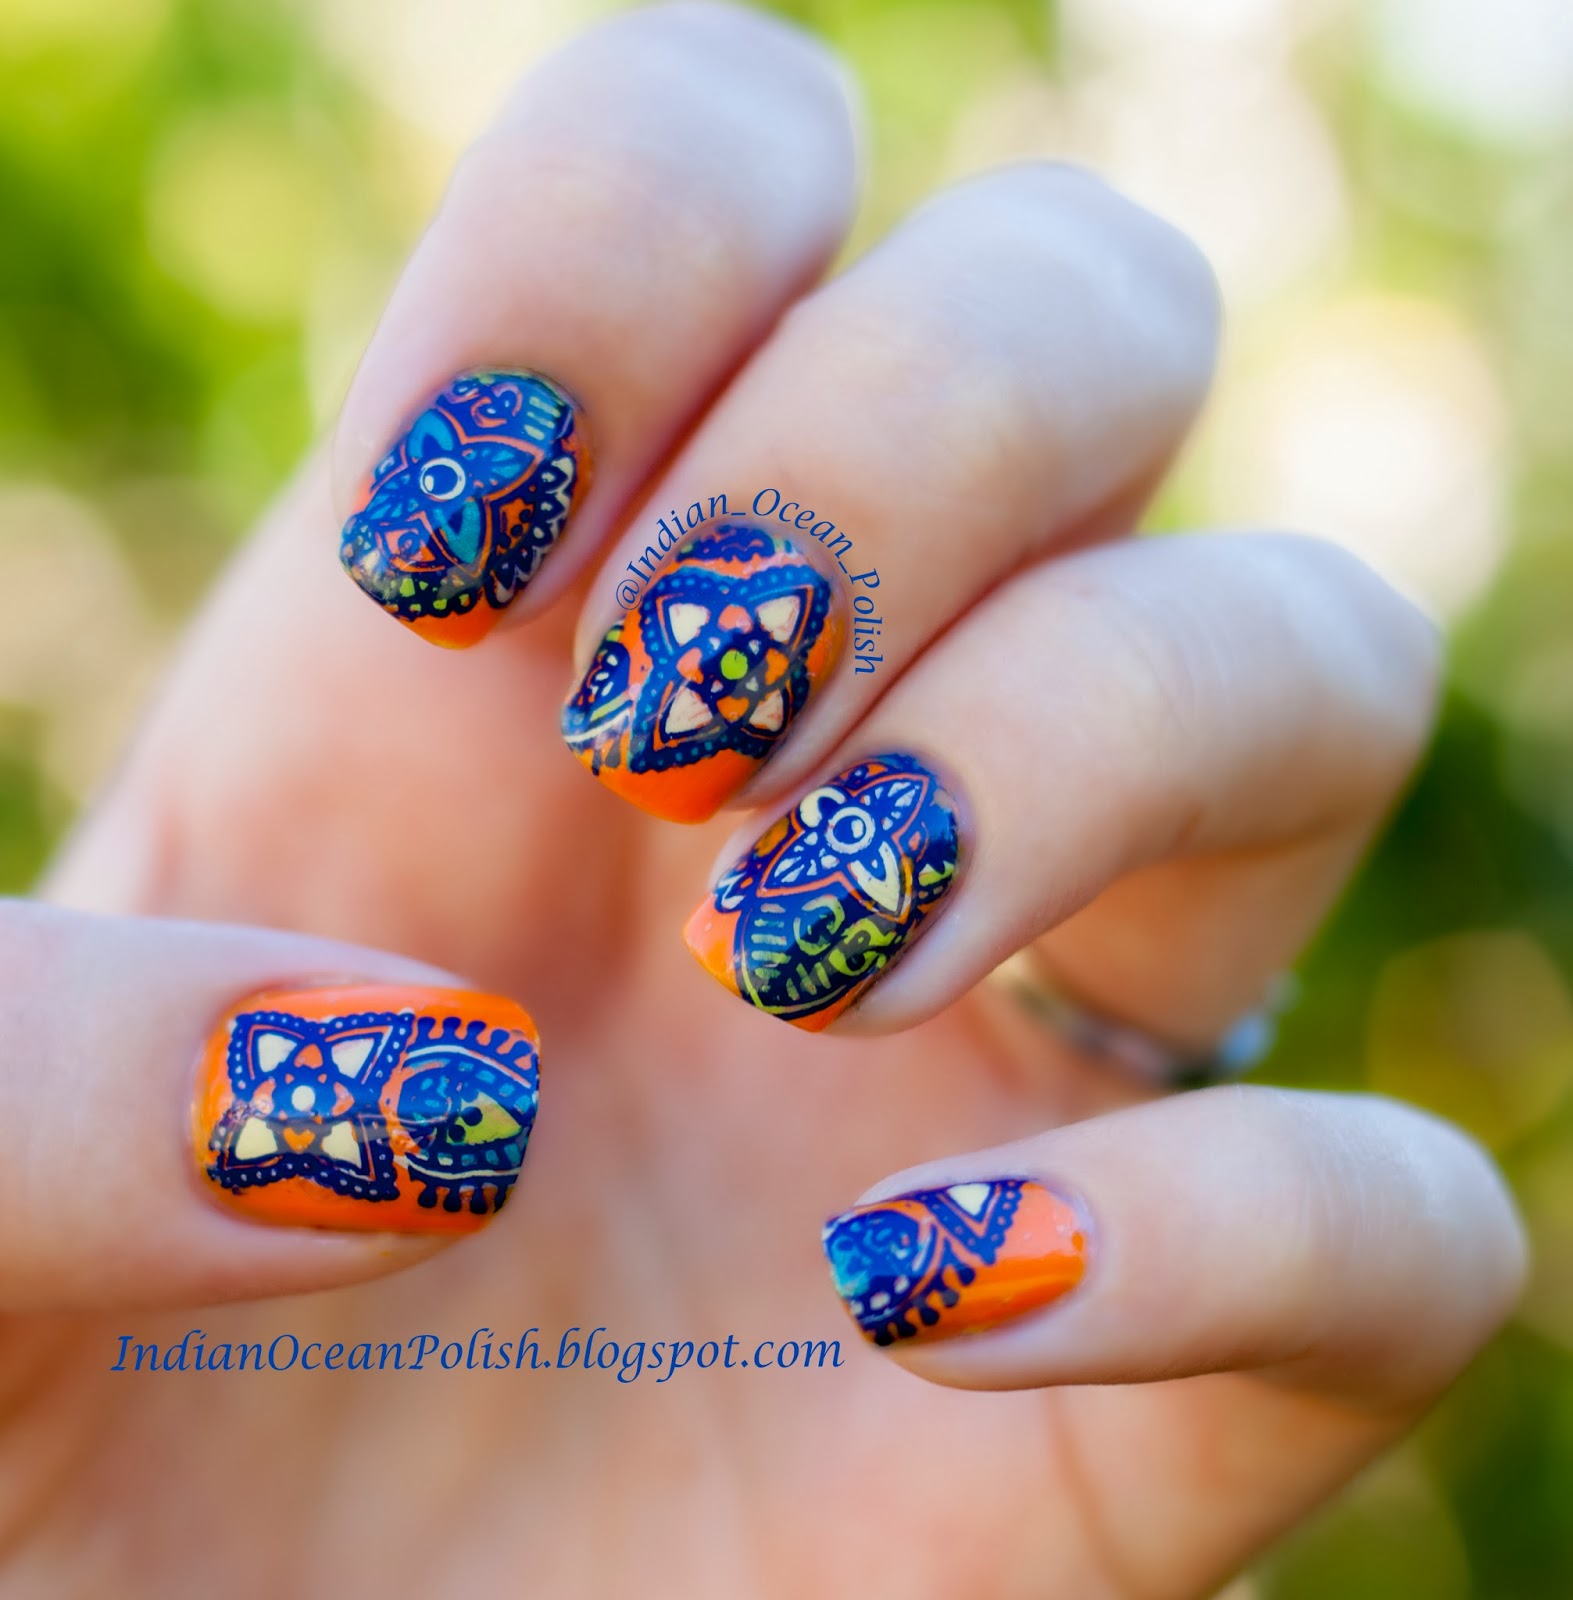 Indian Ocean Polish: How To Make Your Own Nail Decals Tutorial